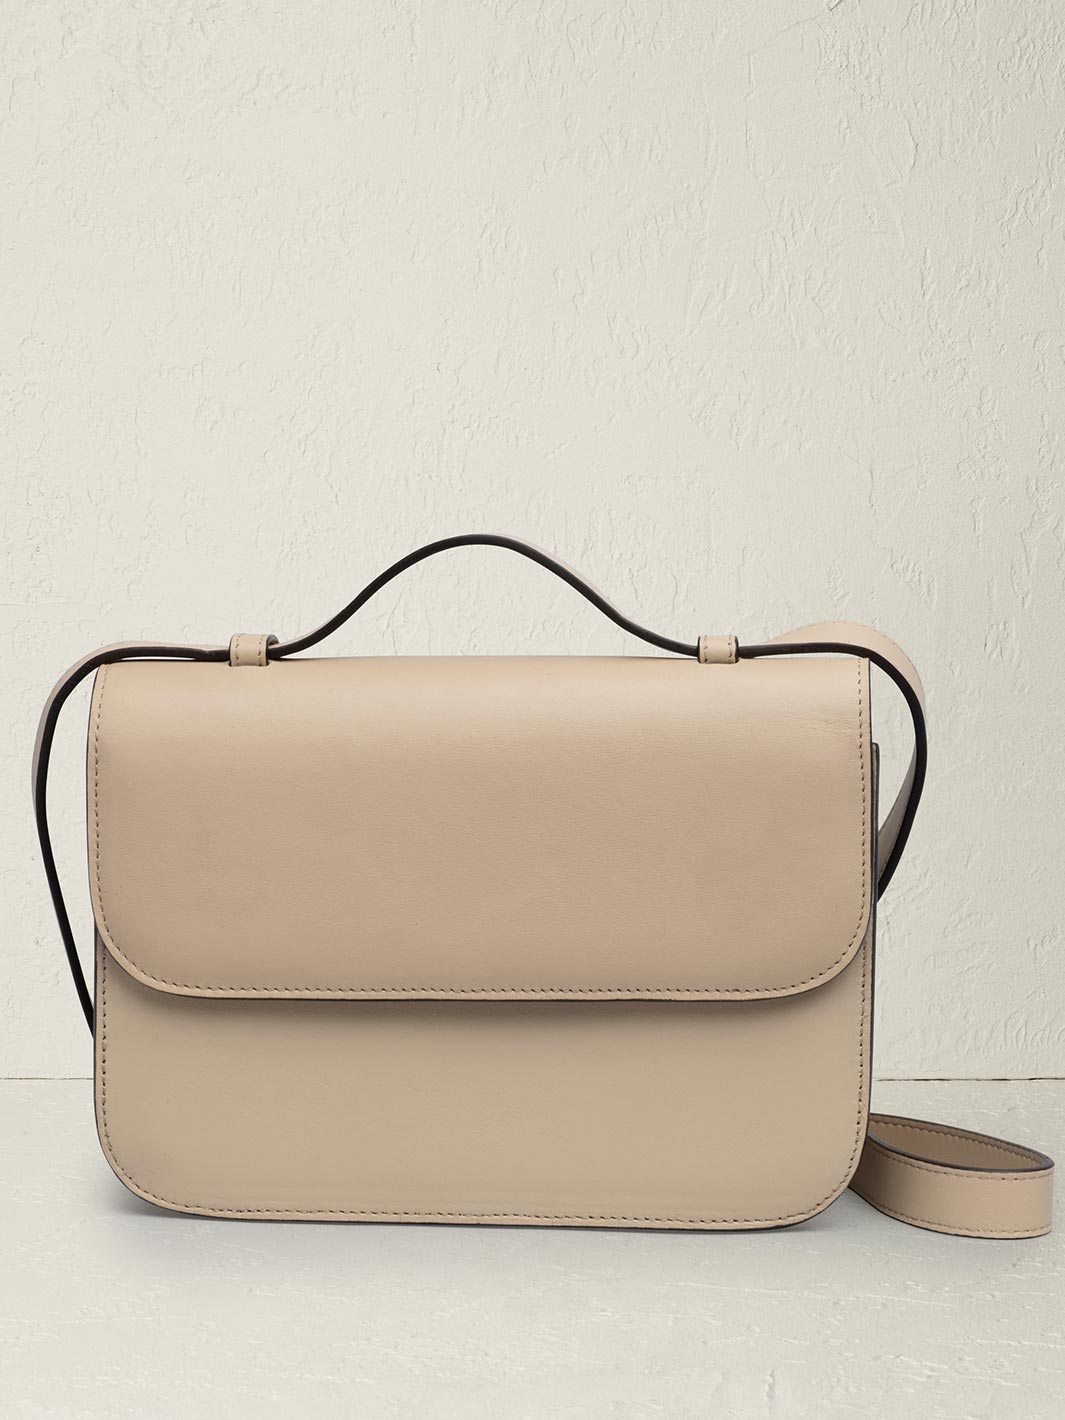 The Crossbody in Oyster Nappa Leather